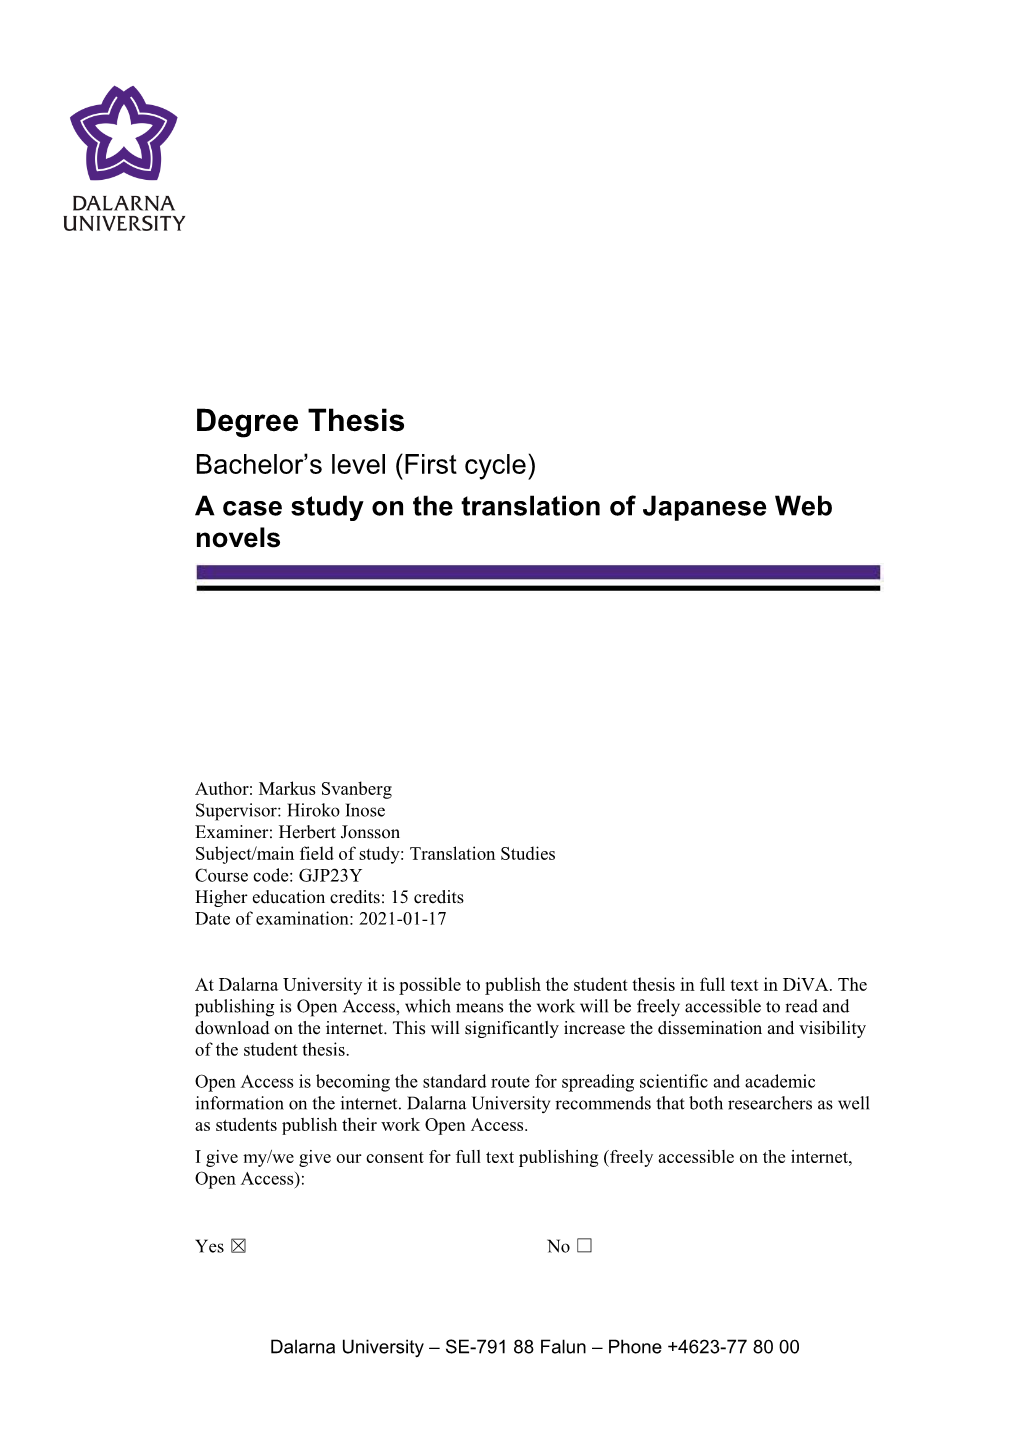 Degree Thesis Bachelor’S Level (First Cycle) a Case Study on the Translation of Japanese Web Novels